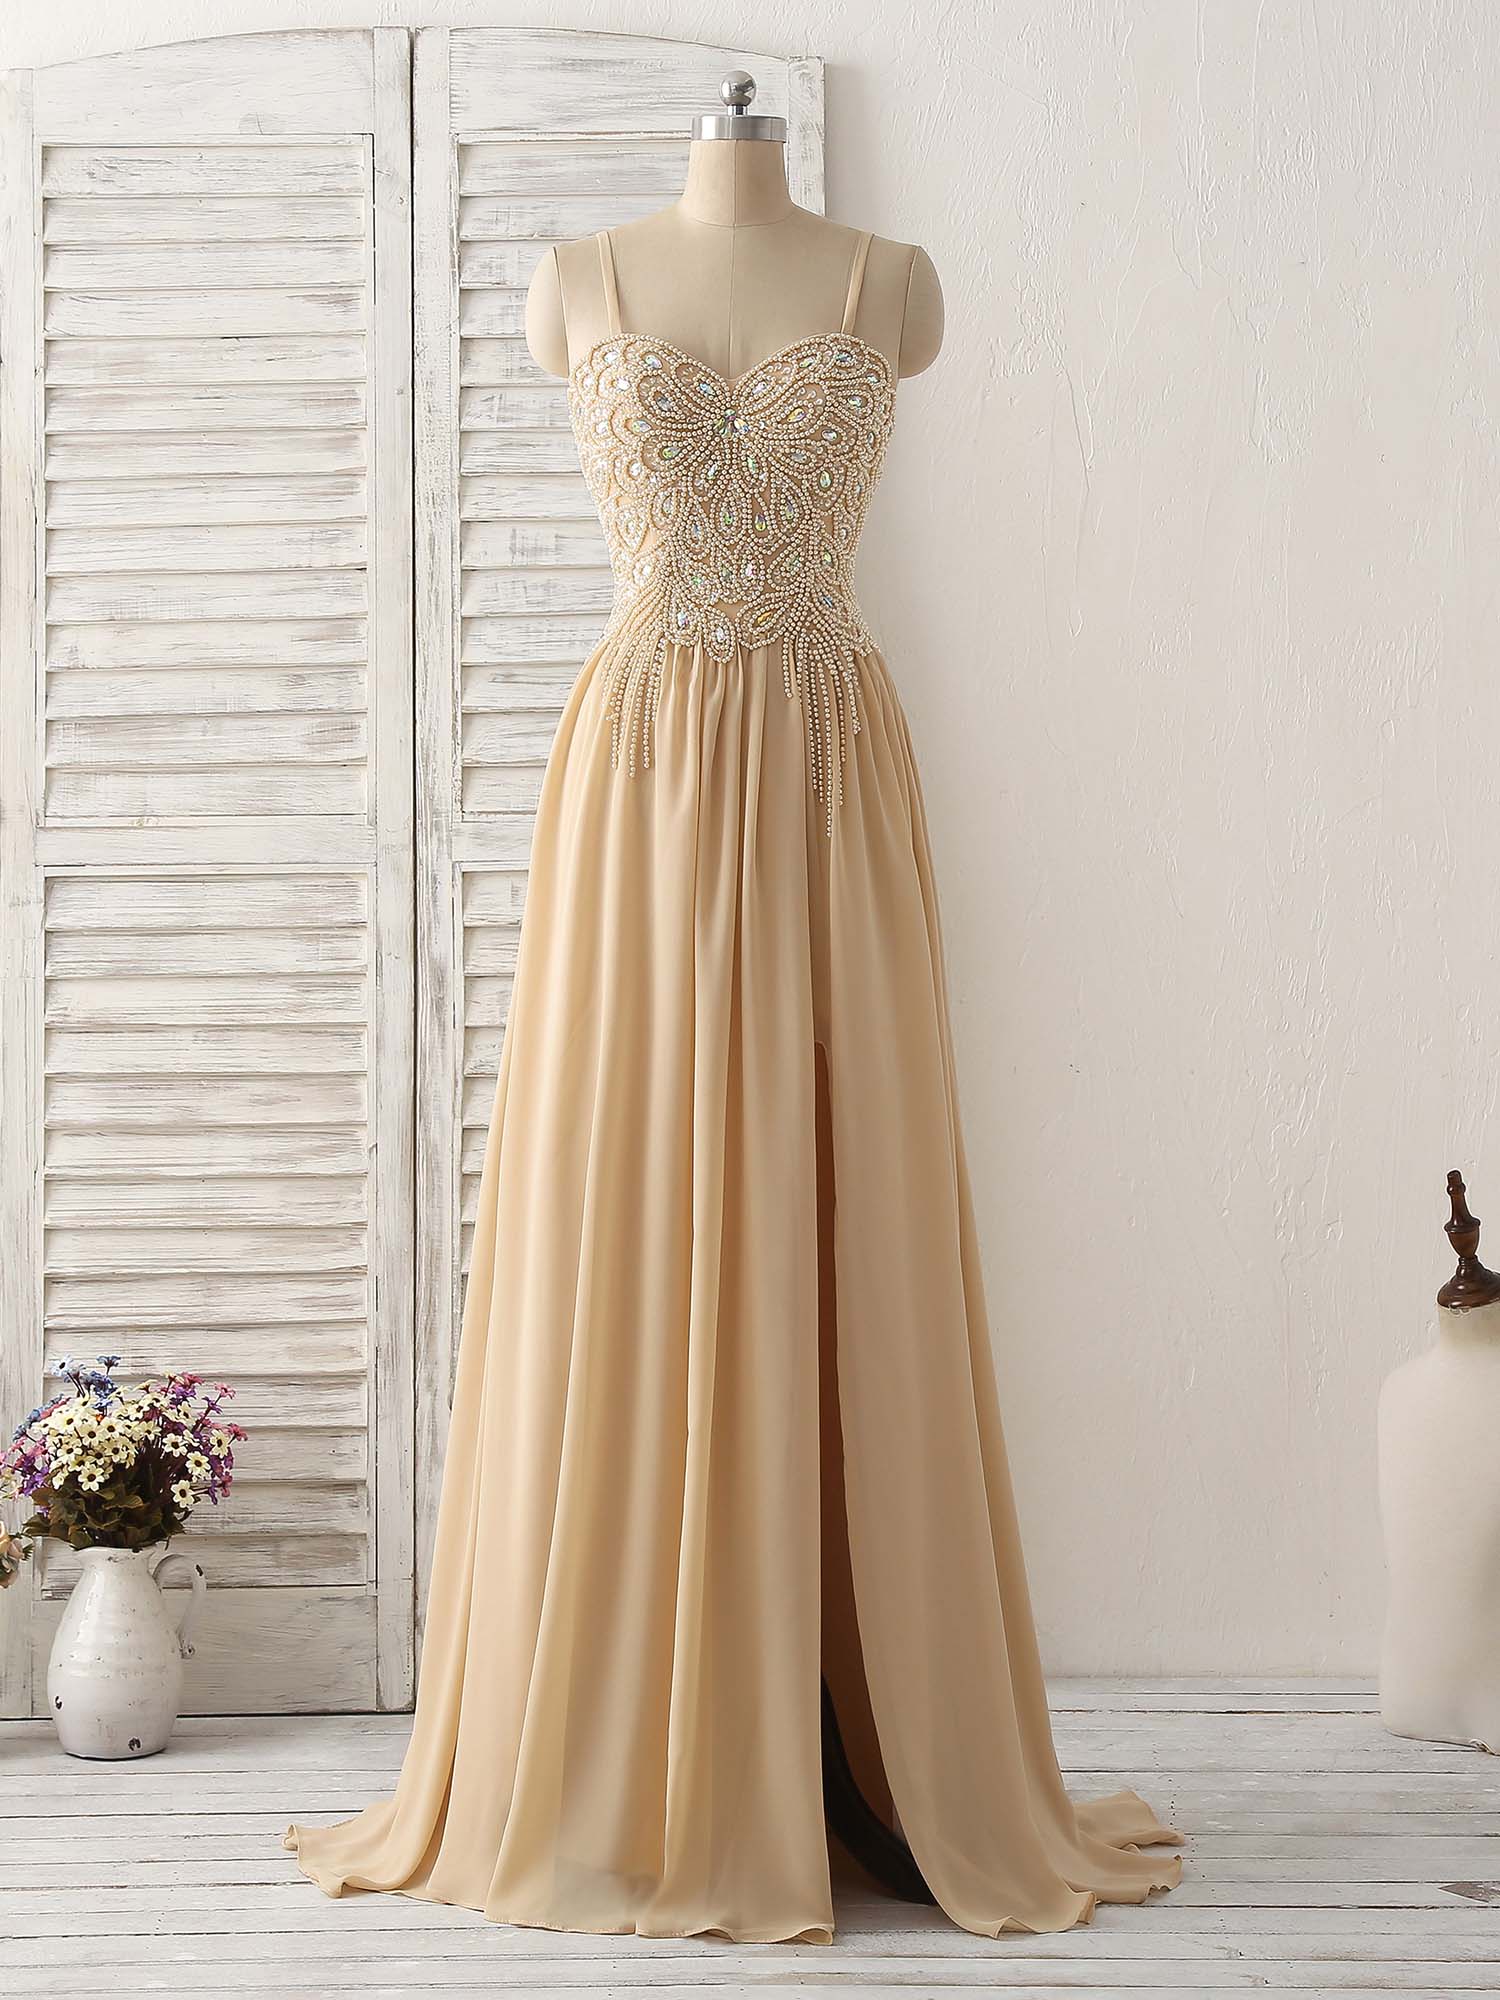 Champagne Sweetheart Neck Beads Long Corset Prom Dress Evening Dress outfit, Formal Dress Long Gown